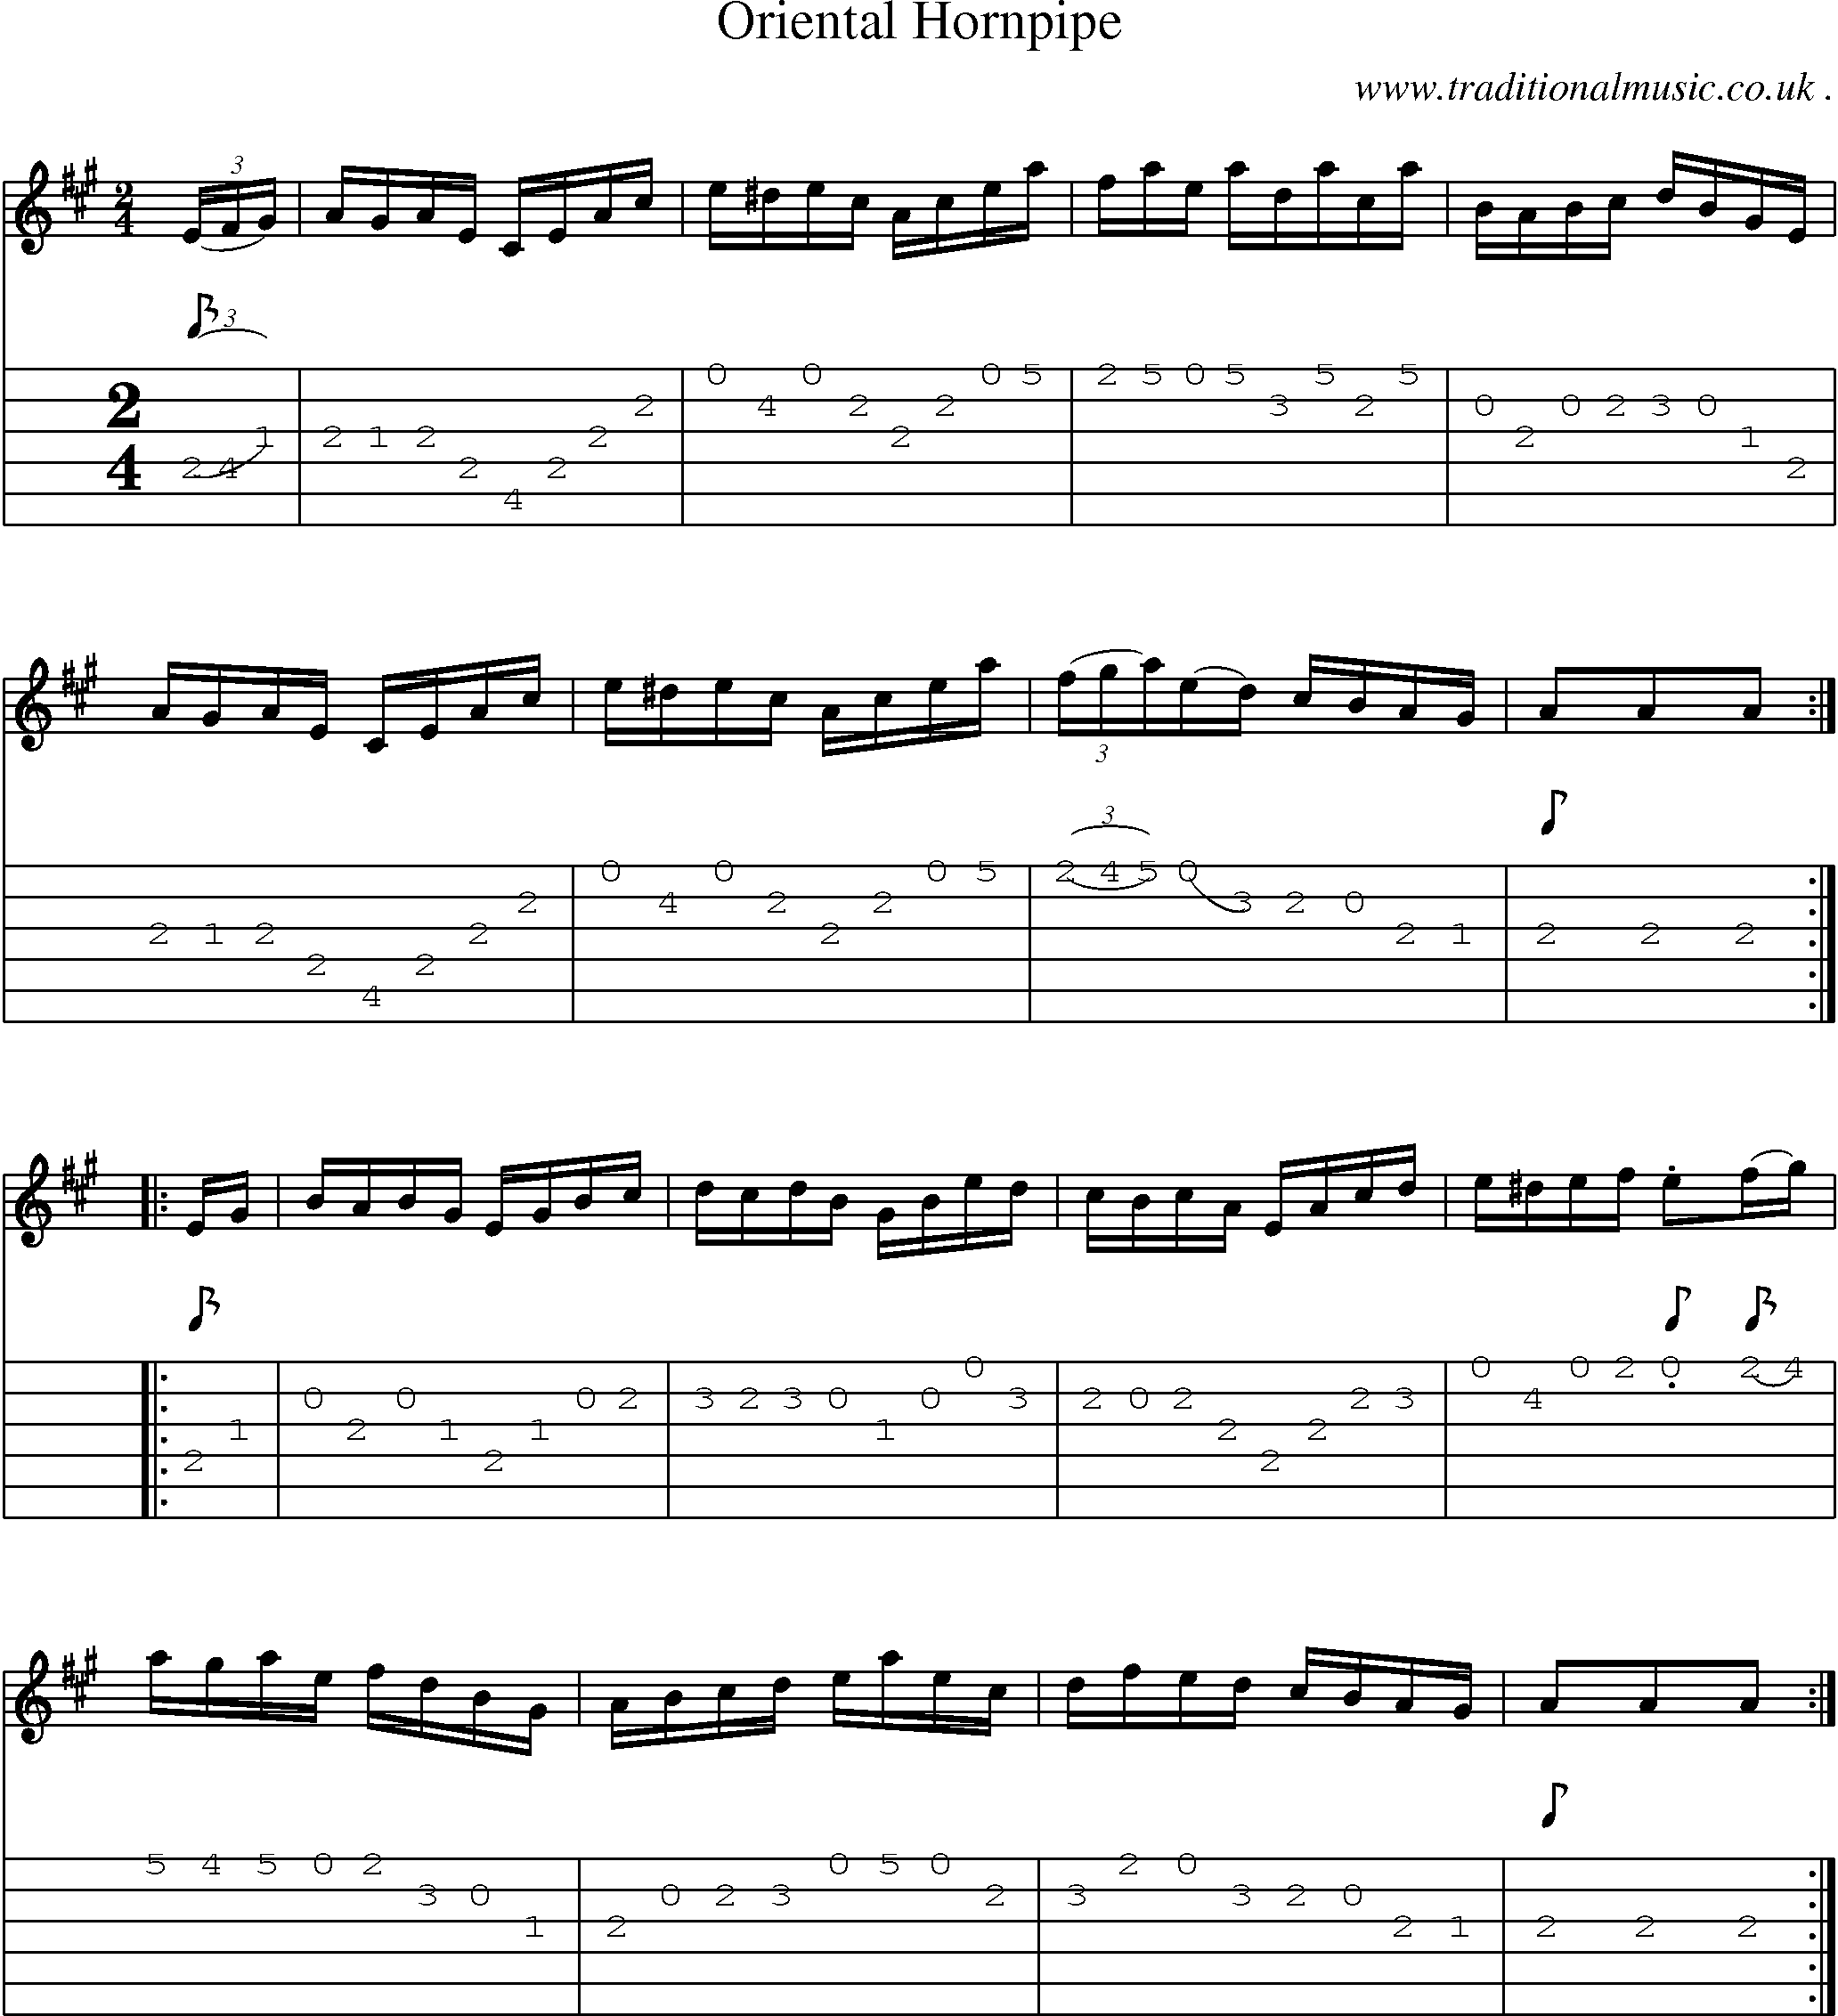 Sheet-Music and Guitar Tabs for Oriental Hornpipe